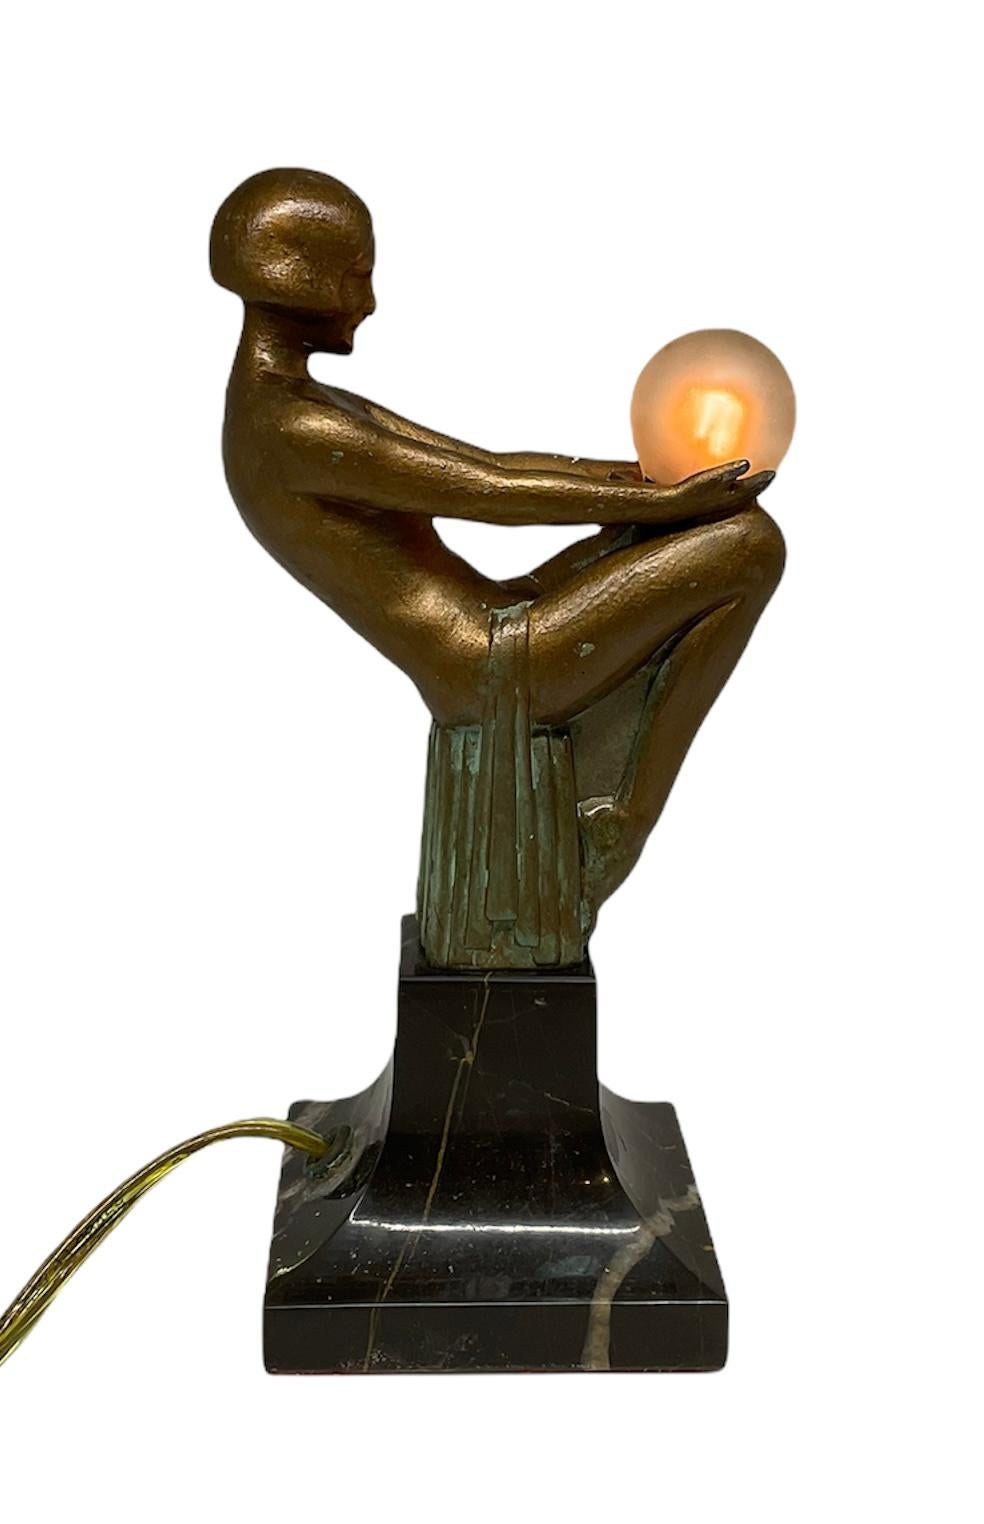 This is a Max Le Verrier “Songe Lumineux” Art Deco Lamp. It is depicting a 1920 bronze sculpture of a nude lady seated with her legs together in a rectangular block. A robe only covers her hip area while she is holding a light bulb. The sculpture is